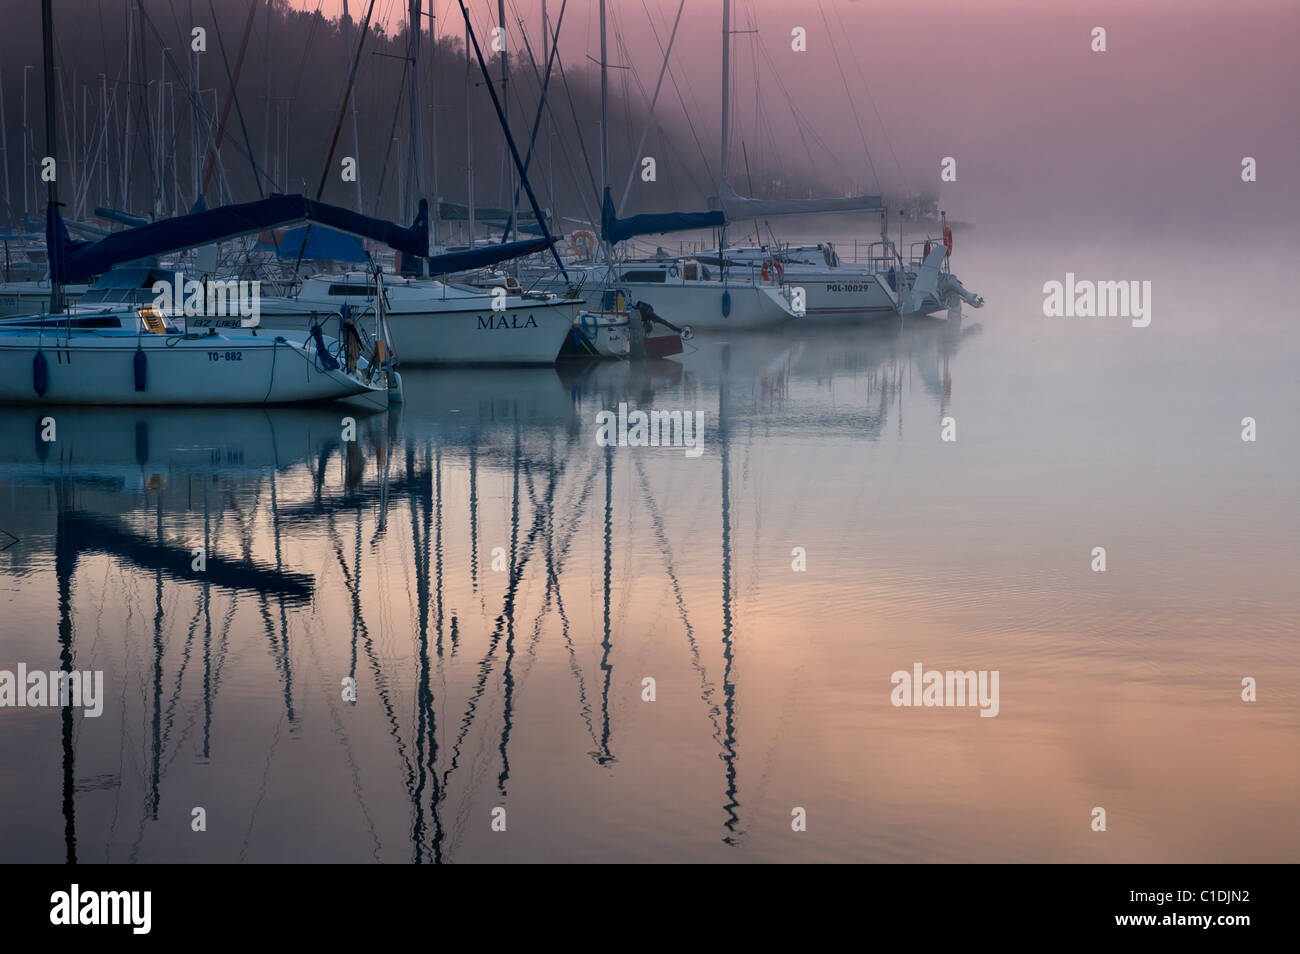 Colorful view of a yachts moored at Nidzkie Lake, Poland. Cold and foggy morning Stock Photo